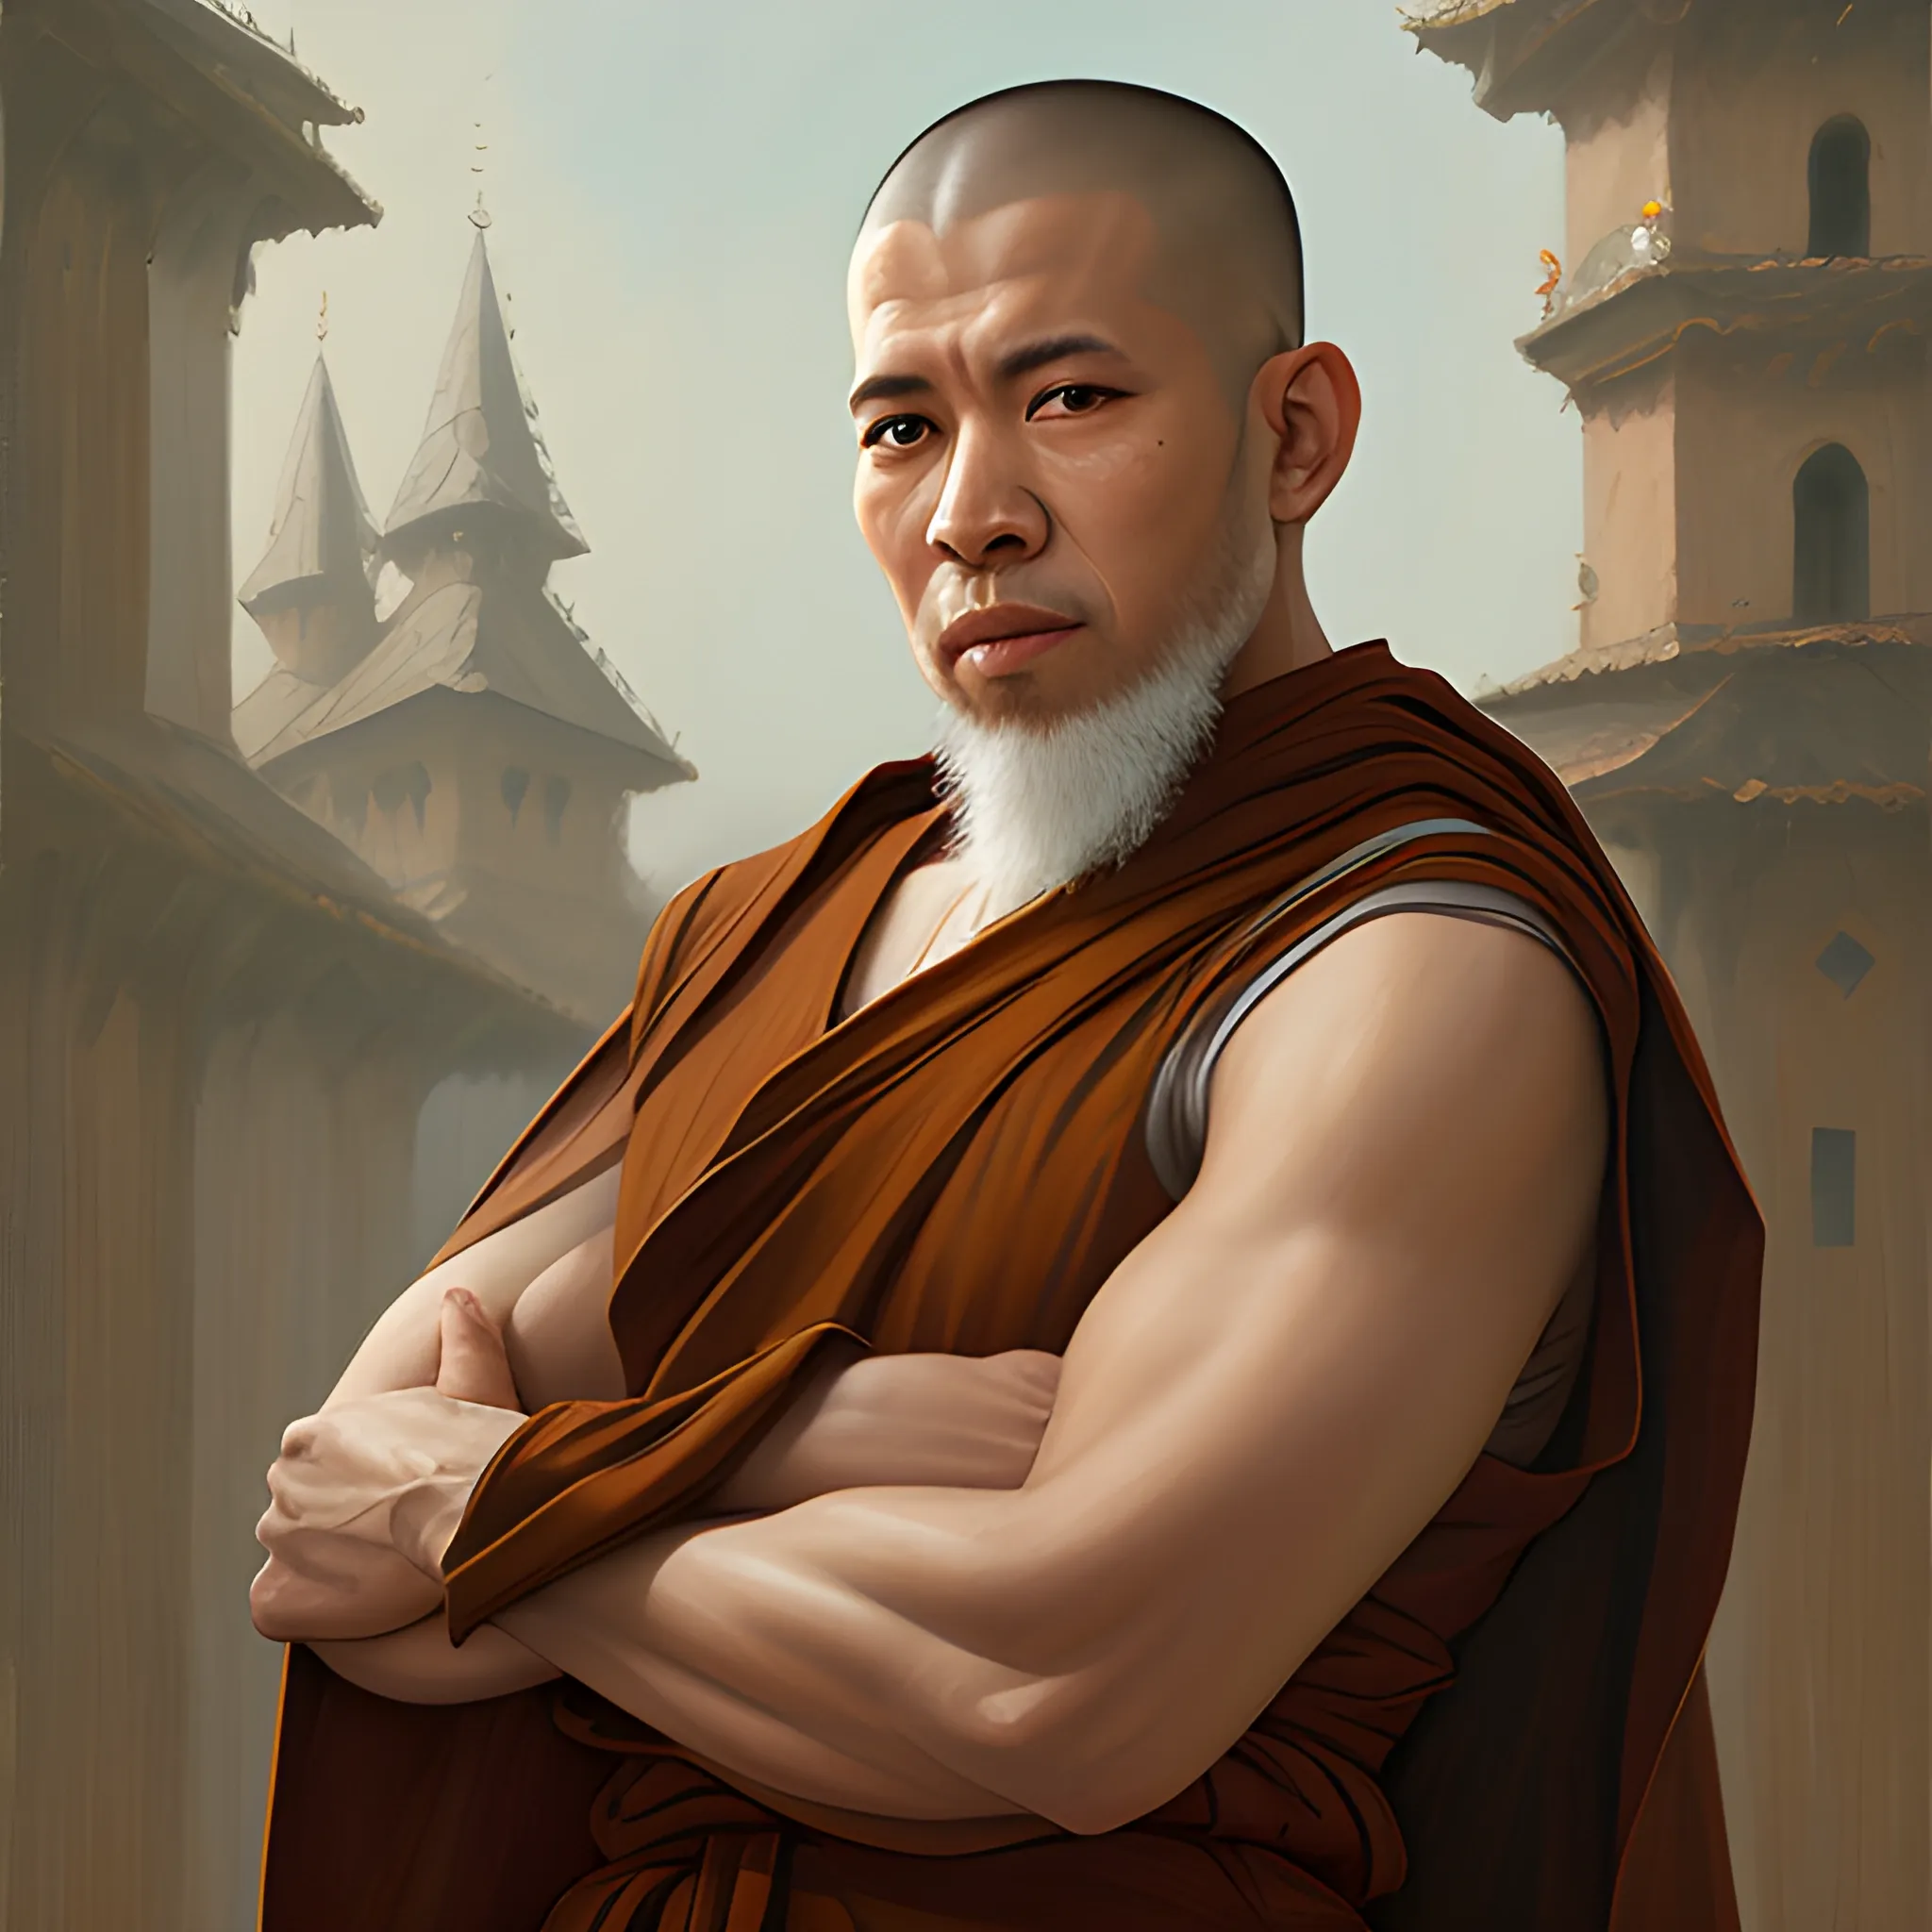 Portrait, Oil Painting, monk, Brown sleeveless robes, Fantasy, Front